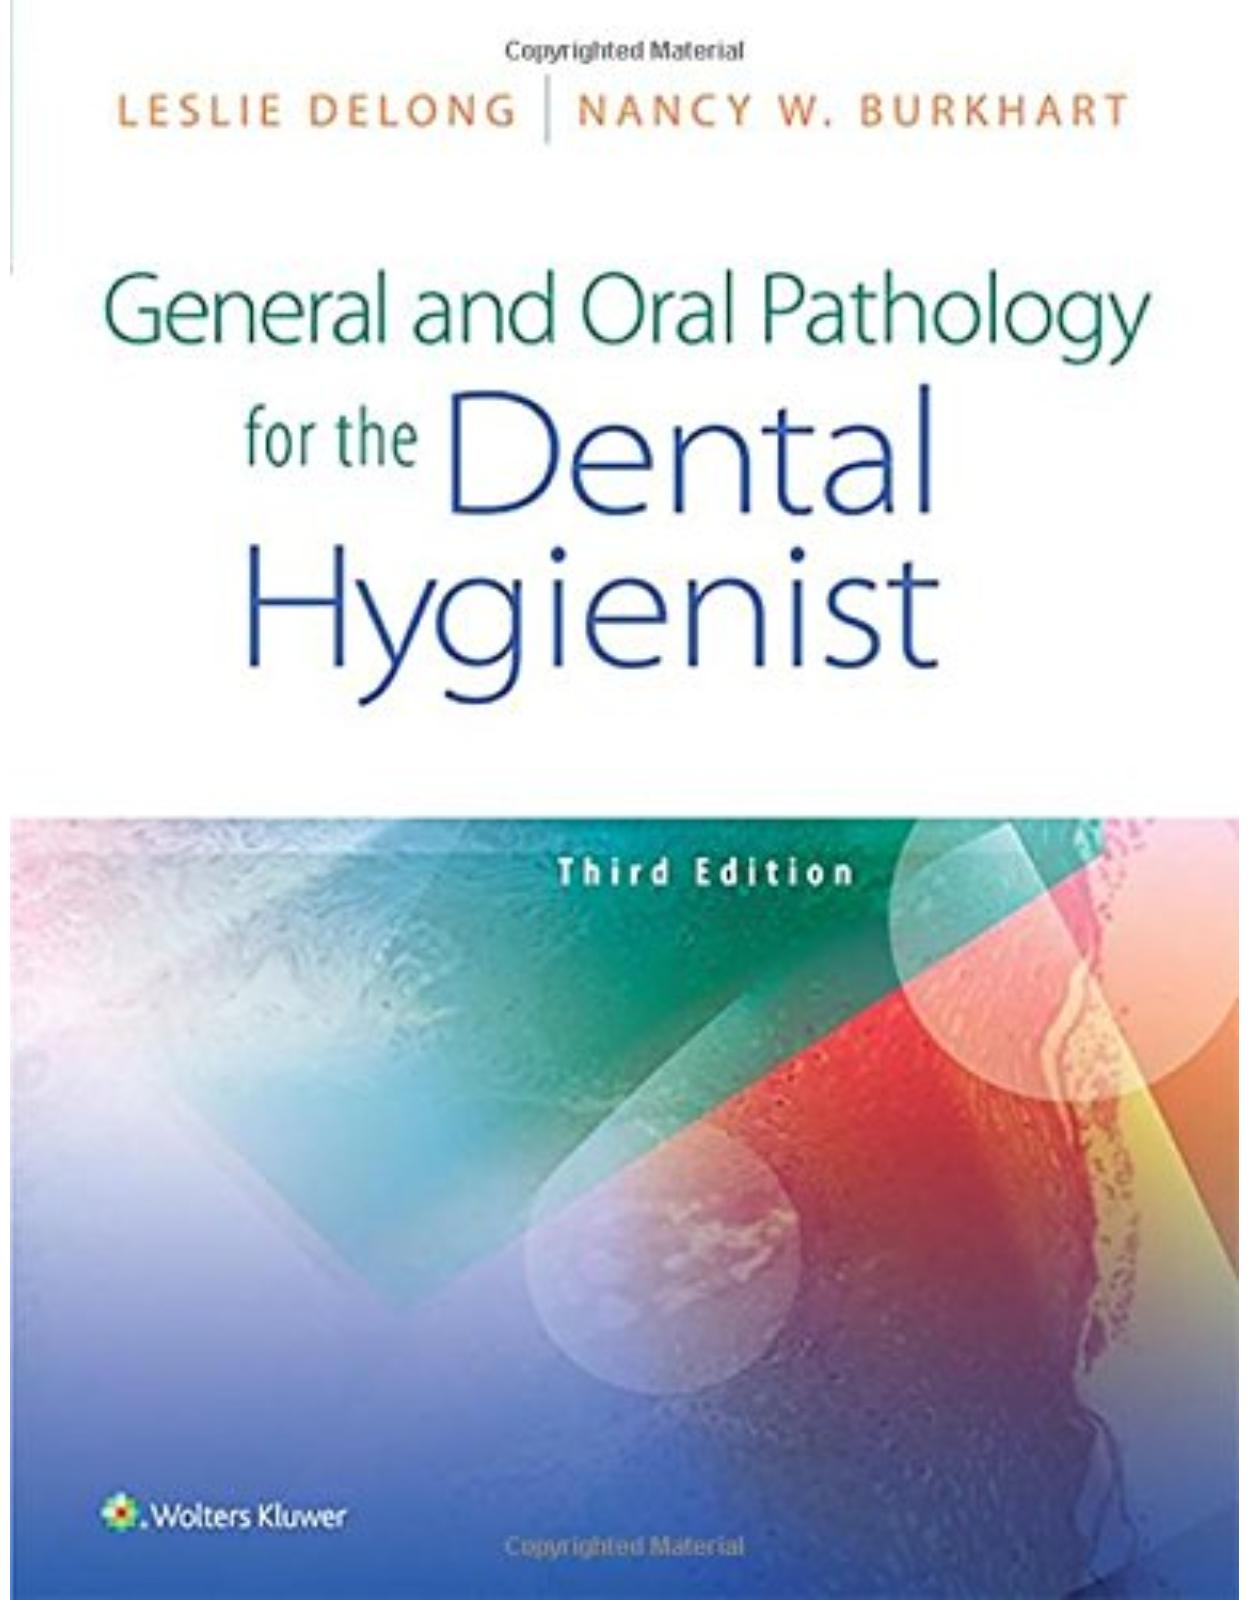 General and Oral Pathology for the Dental Hygienist 